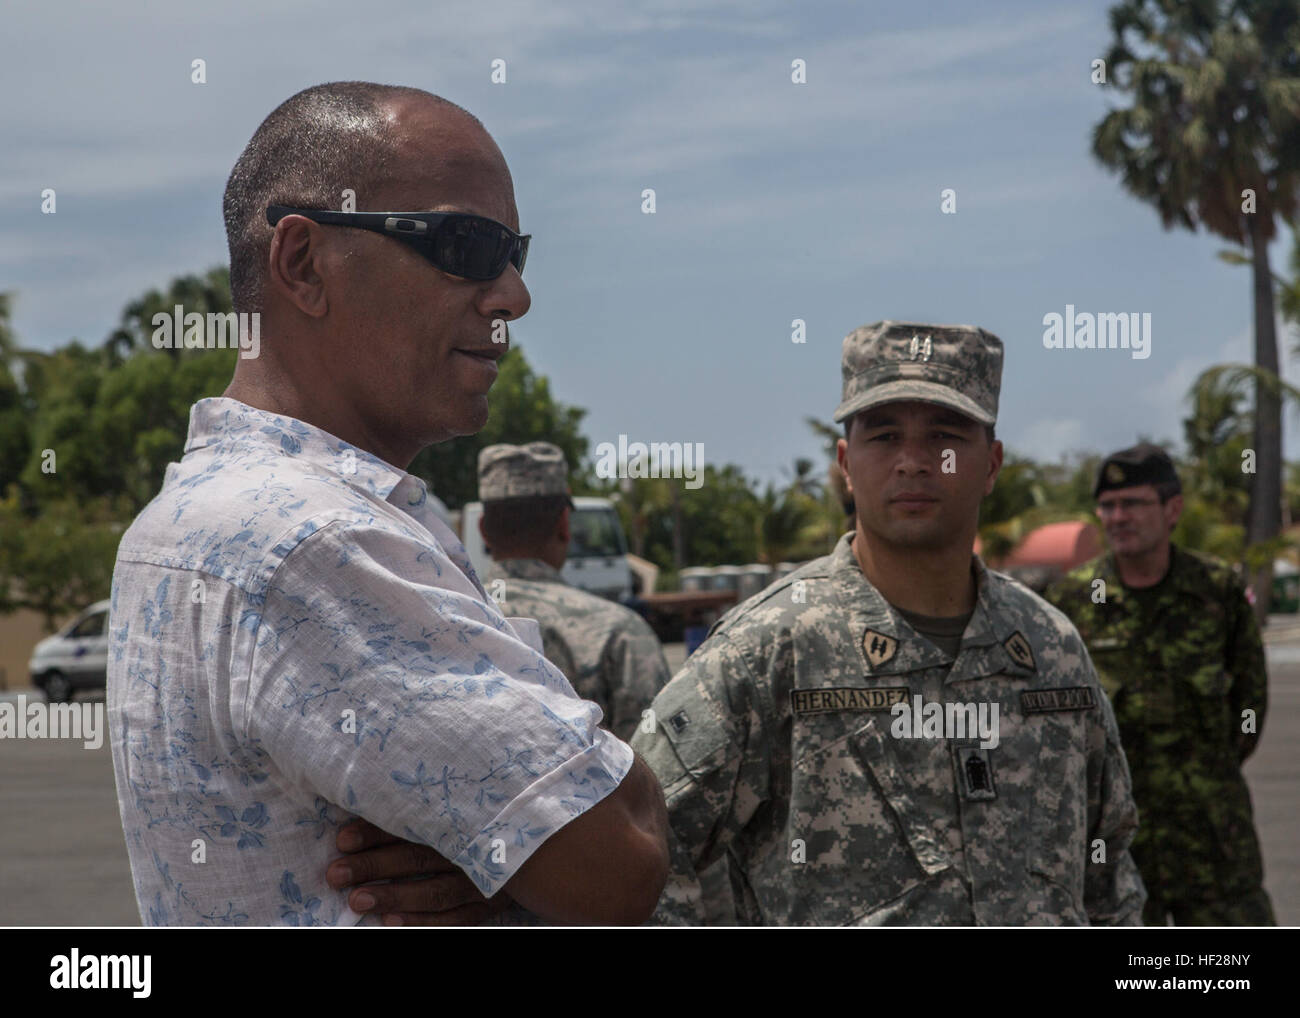 Moses Alou, former major league baseball player,  speaks with officers from the U.S. Marines with Charley Company, 4th Law Enforcement Battalion, Marine Forces Reserve, and from the 13 partner nations that are stationed aboard the Dominican Naval Base, Las Calderas located near Bani, Dominican Republic during Exercise Tradewinds 2014, June 21, 2014. Ambassador Brewster visited the naval base and had the opportunity to observe some of the training evolutions taking place as part of phase II of the exercise. Phase II of Tradewinds 2014 is mostly a ground field training exercise held from June 16 Stock Photo